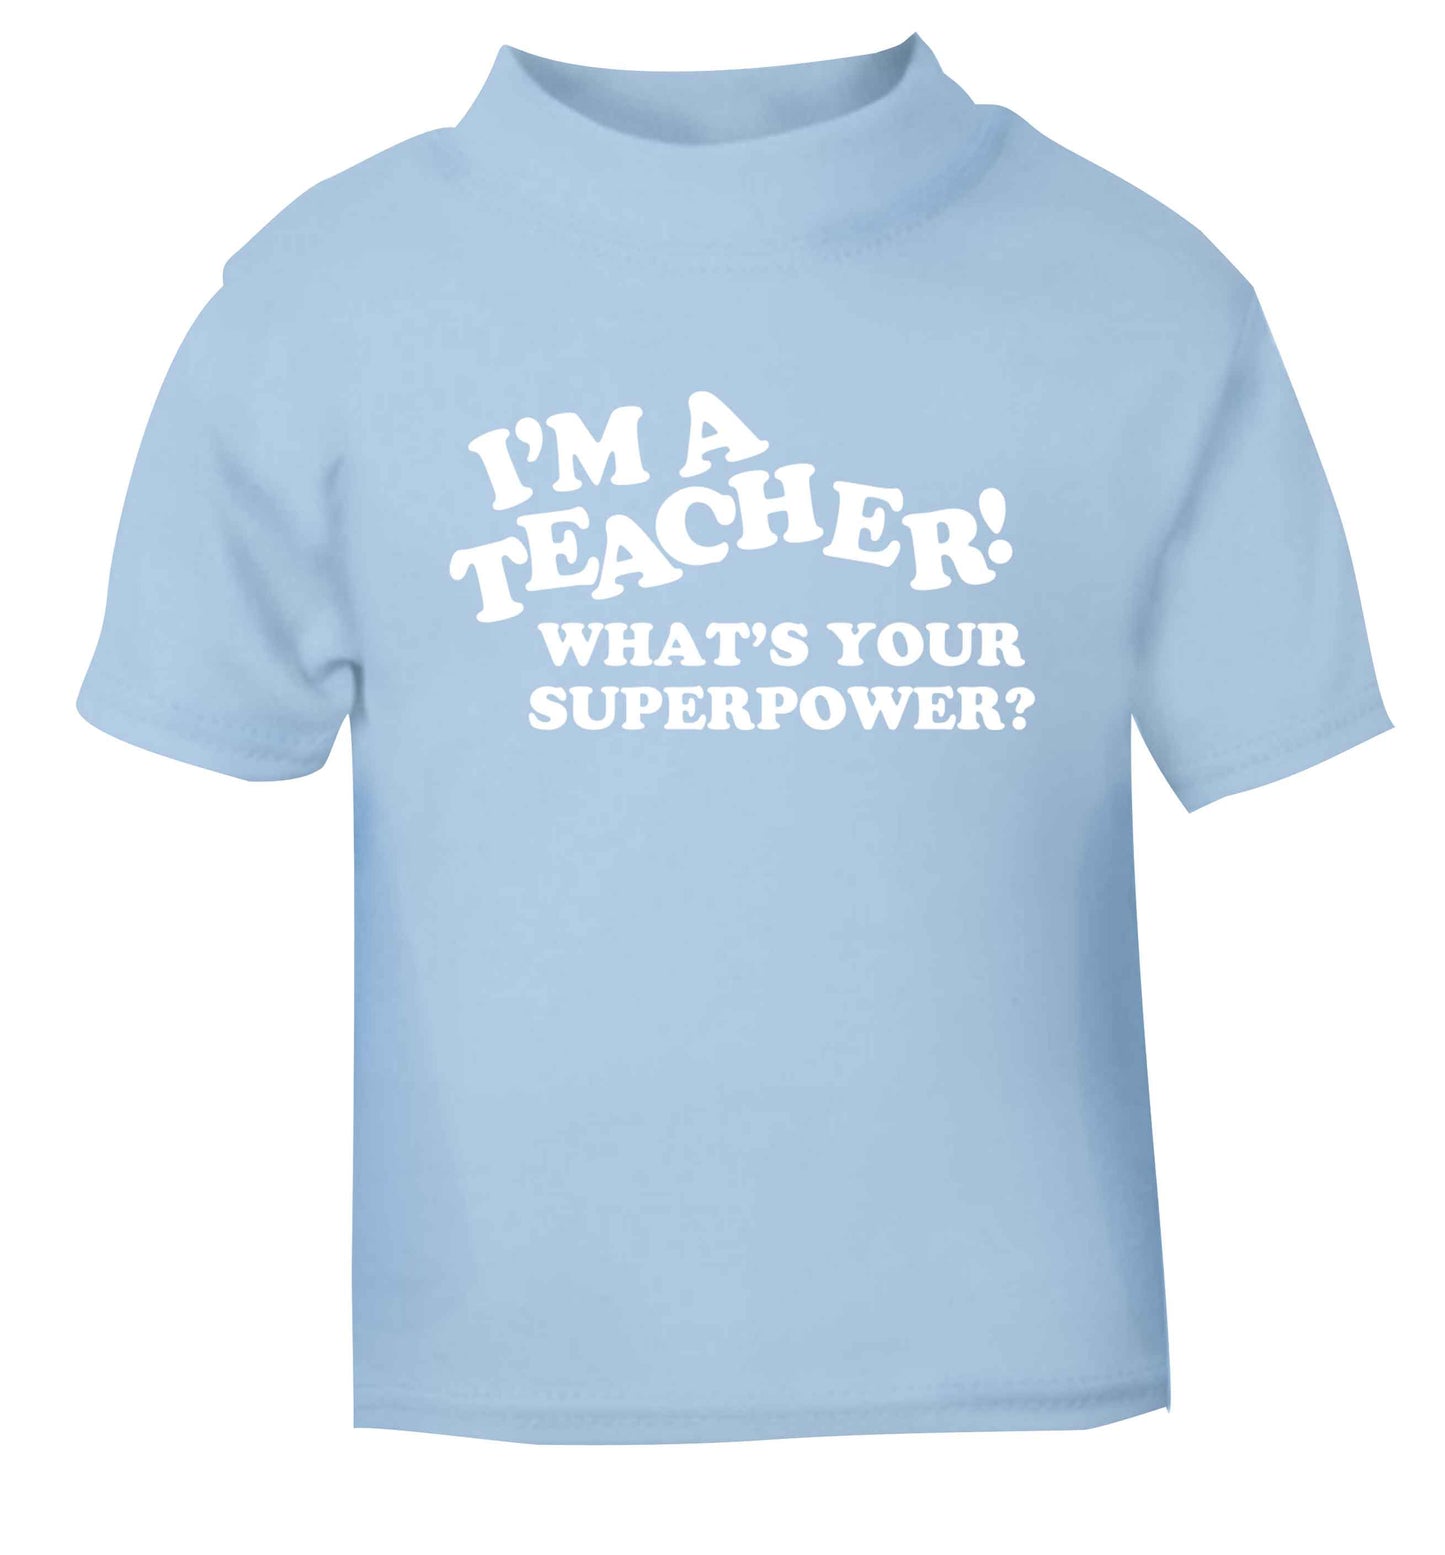 I'm a teacher what's your superpower?! light blue baby toddler Tshirt 2 Years